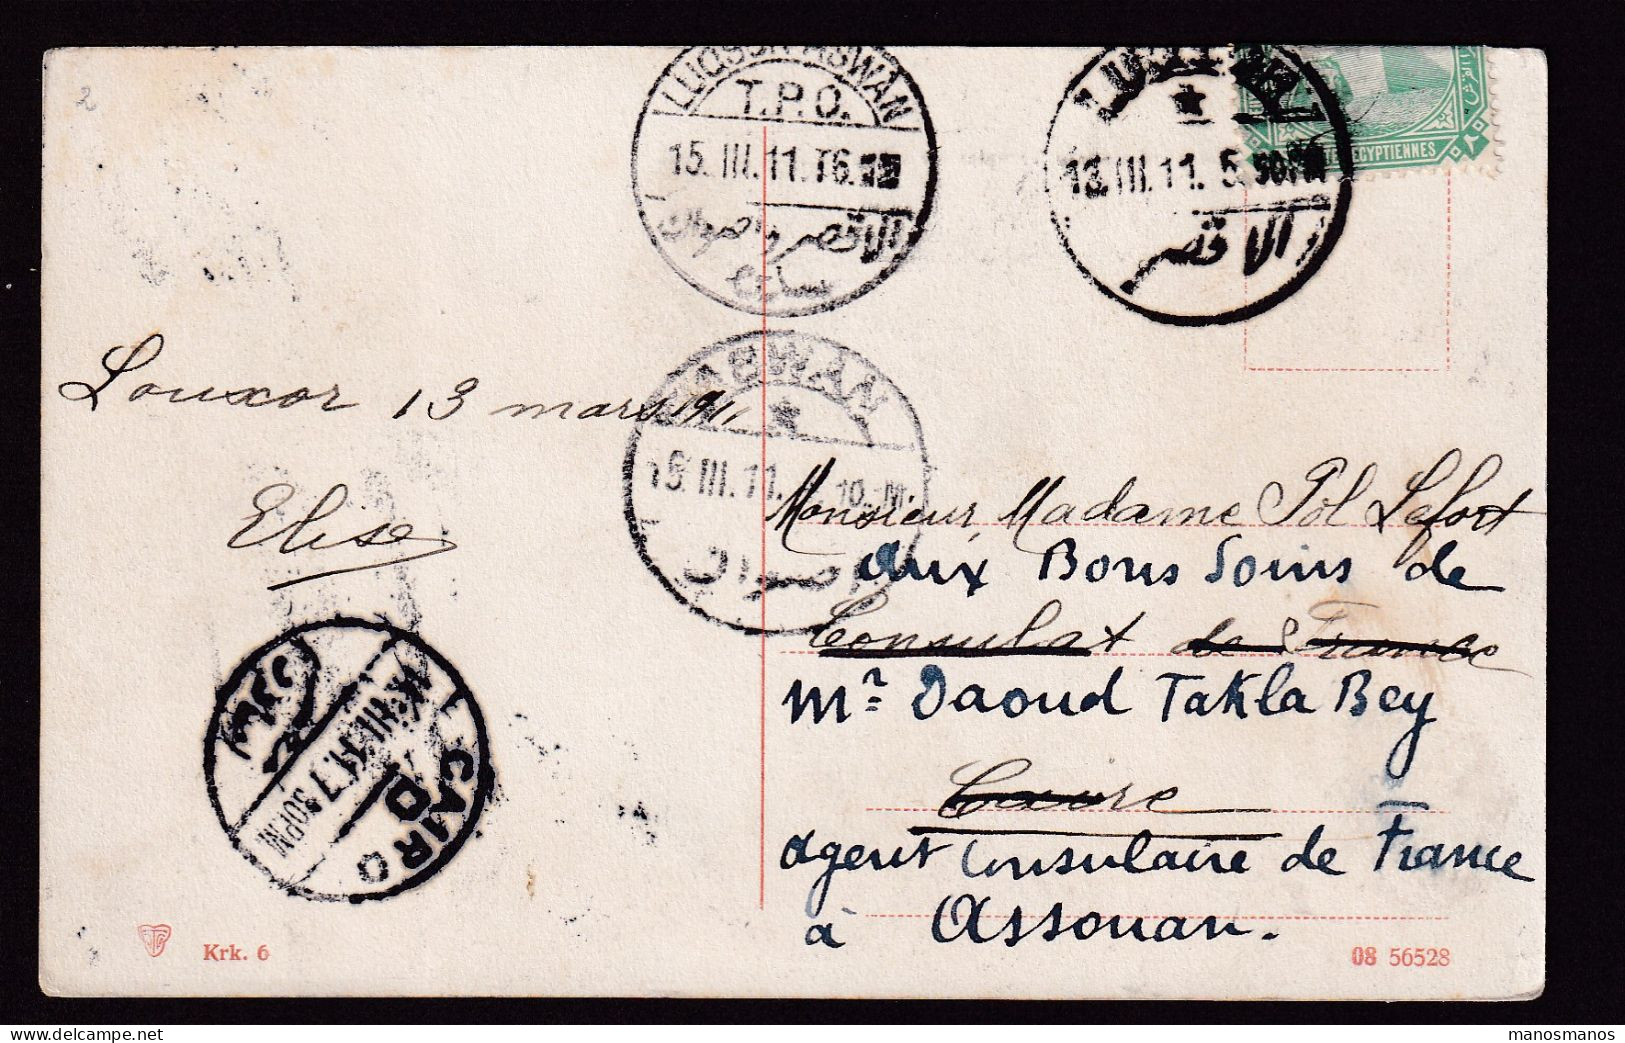 388/31 -- EGYPT LUQSOR-ASWAN TPO (Better Direction)  - Viewcard Cancelled 1911 To CAIRO, Then ASWAN - 1866-1914 Khedivate Of Egypt